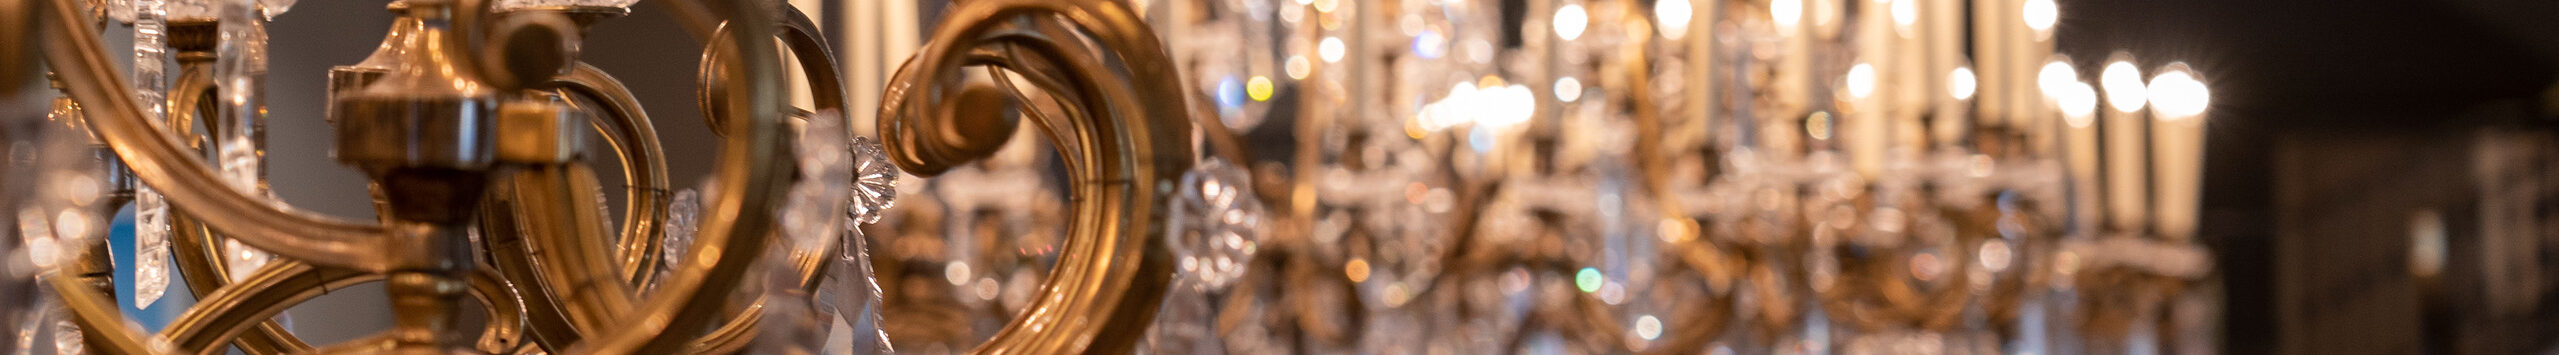 Close-up view of ornate gold and crystal chandeliers in the museum's Great Hall. The camera is focused on the chandelier in the foreground and the rest is out of focus.